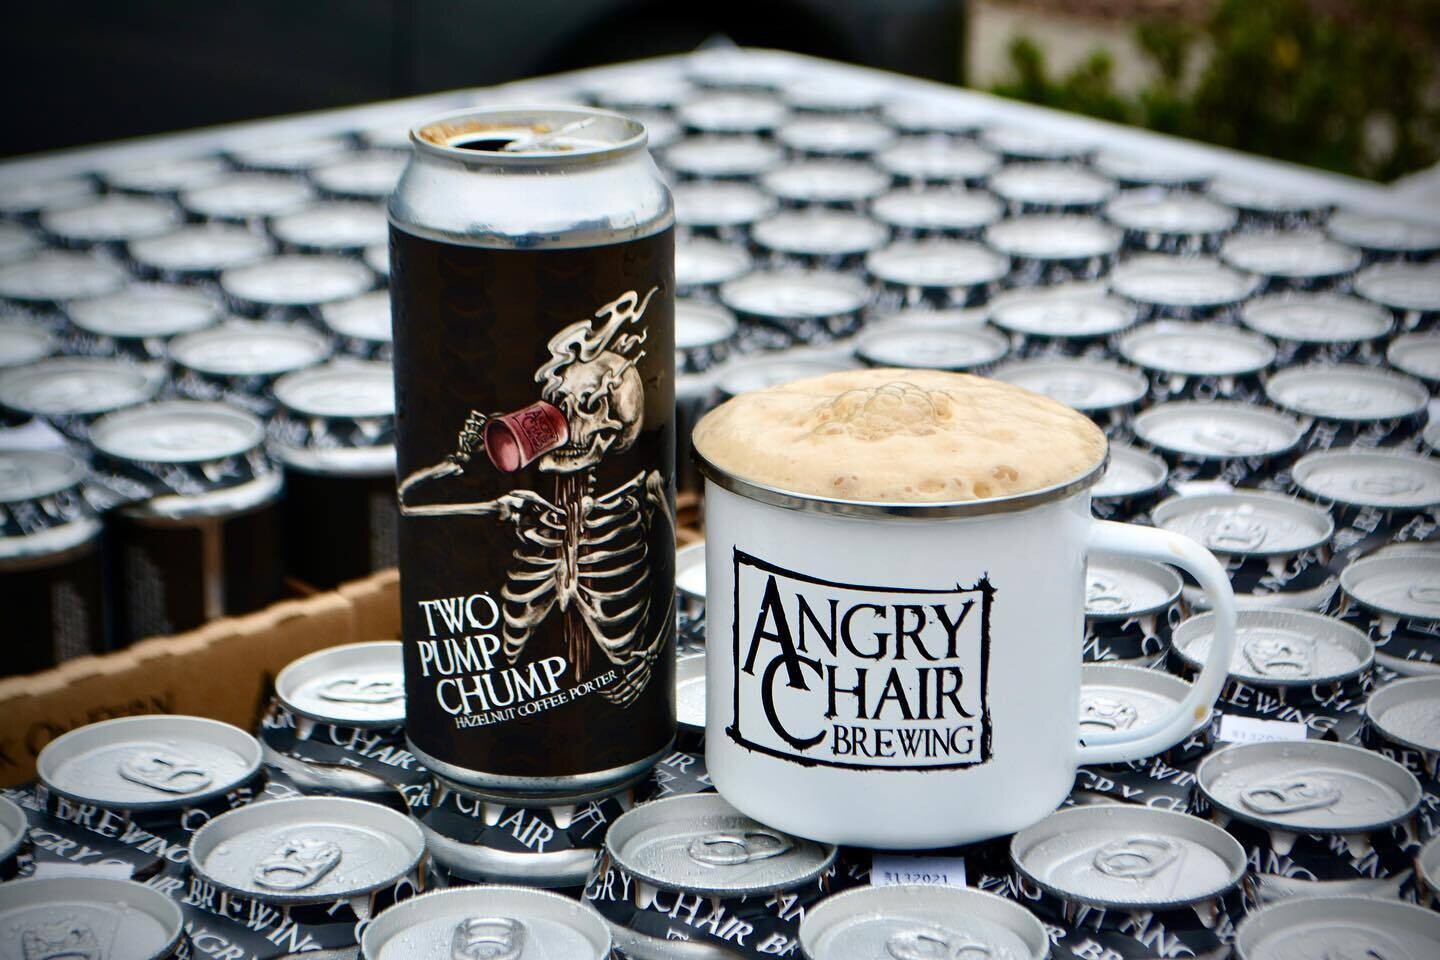 Angry Chair Brewing Two Pump Chump Hazelnut Coffee Porter